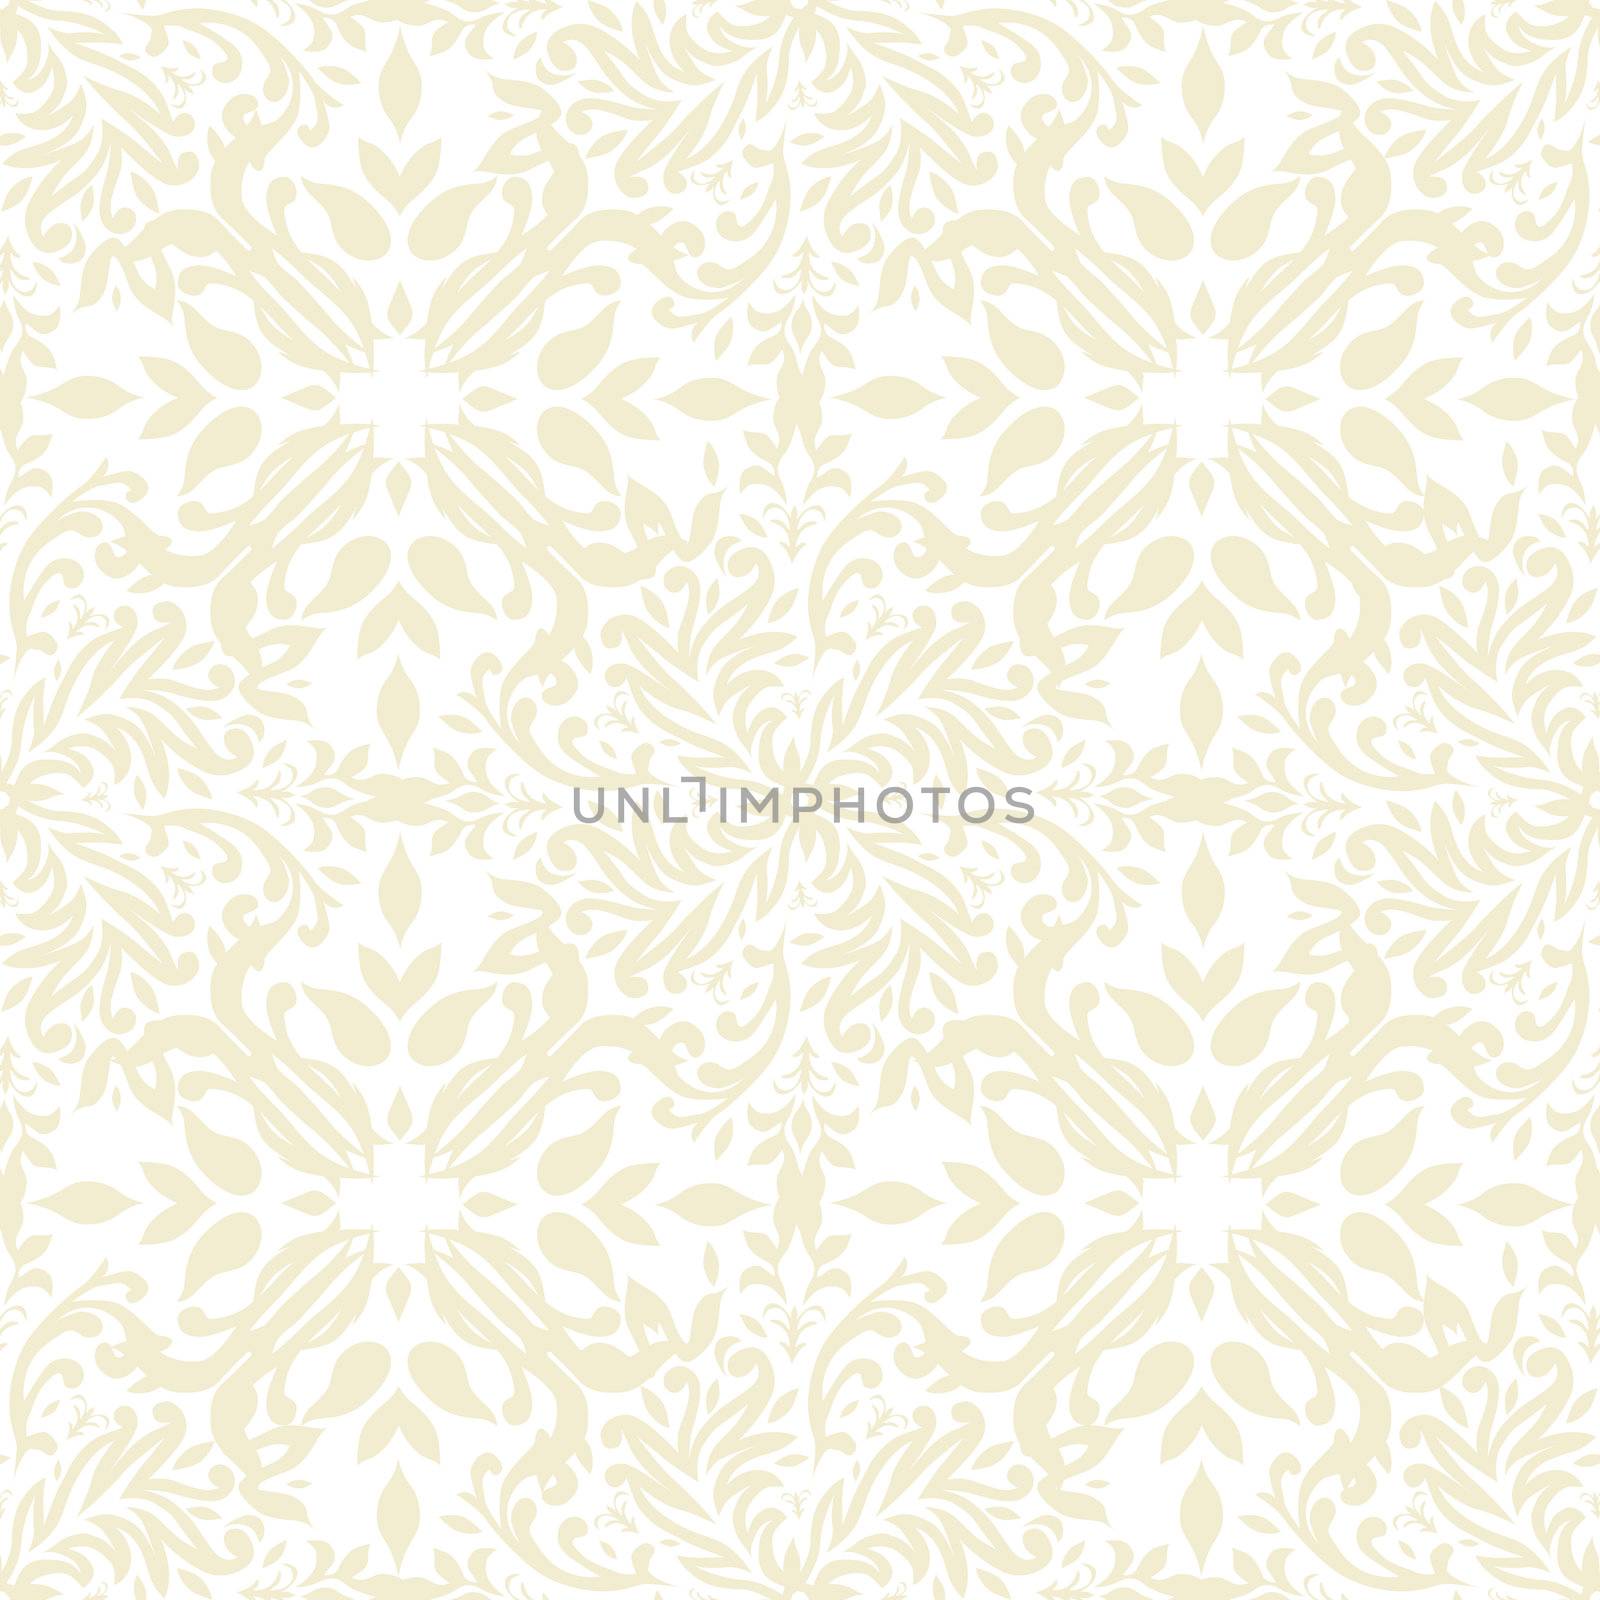 beige floral seamless repeat background with square tile